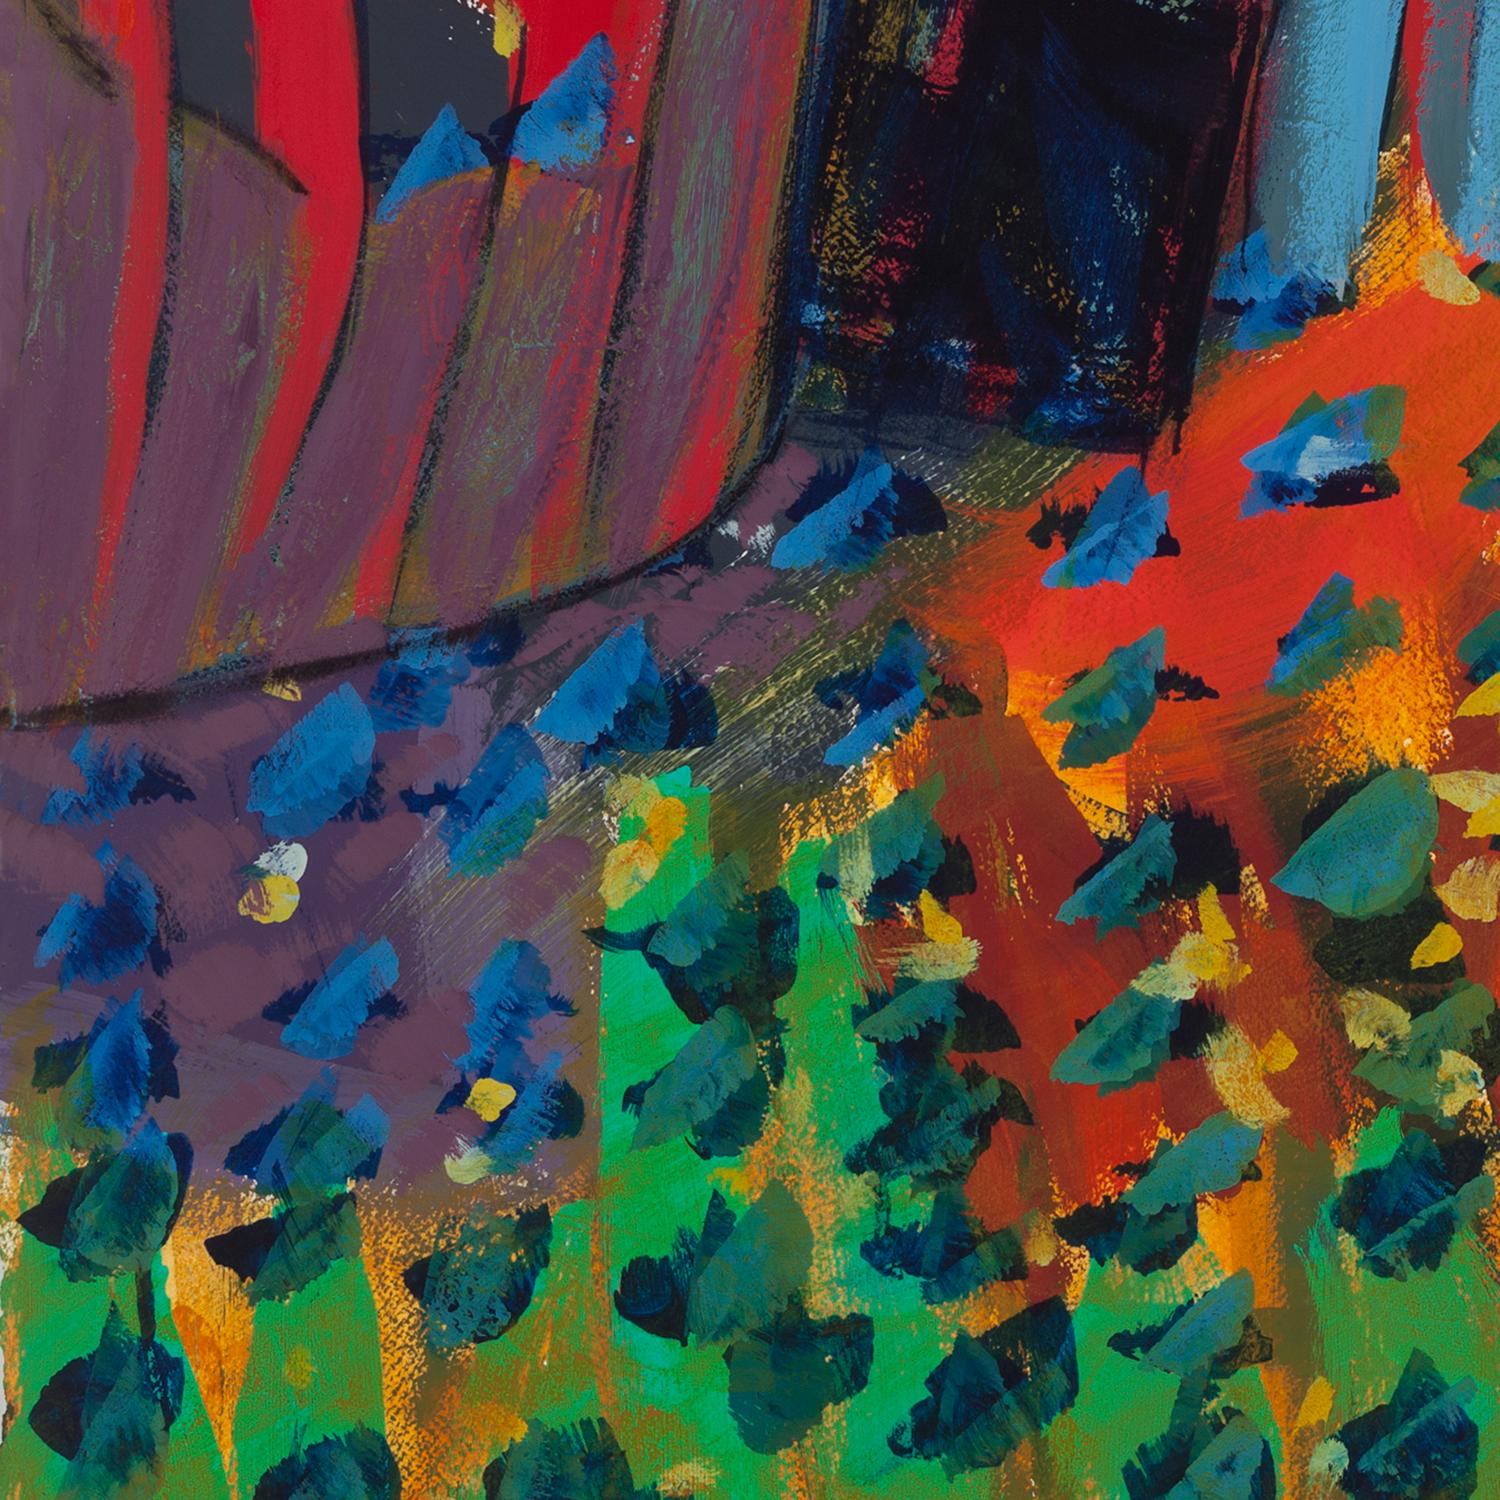 Melissa Shaak’s “Fiesta Road” is a 40 x 26 inch abstract acrylic painting on top-quality Arches paper. A bright red lantern-shaped structure is the focal point of this festive scene. Confetti-like color illuminates the field in the foreground, while